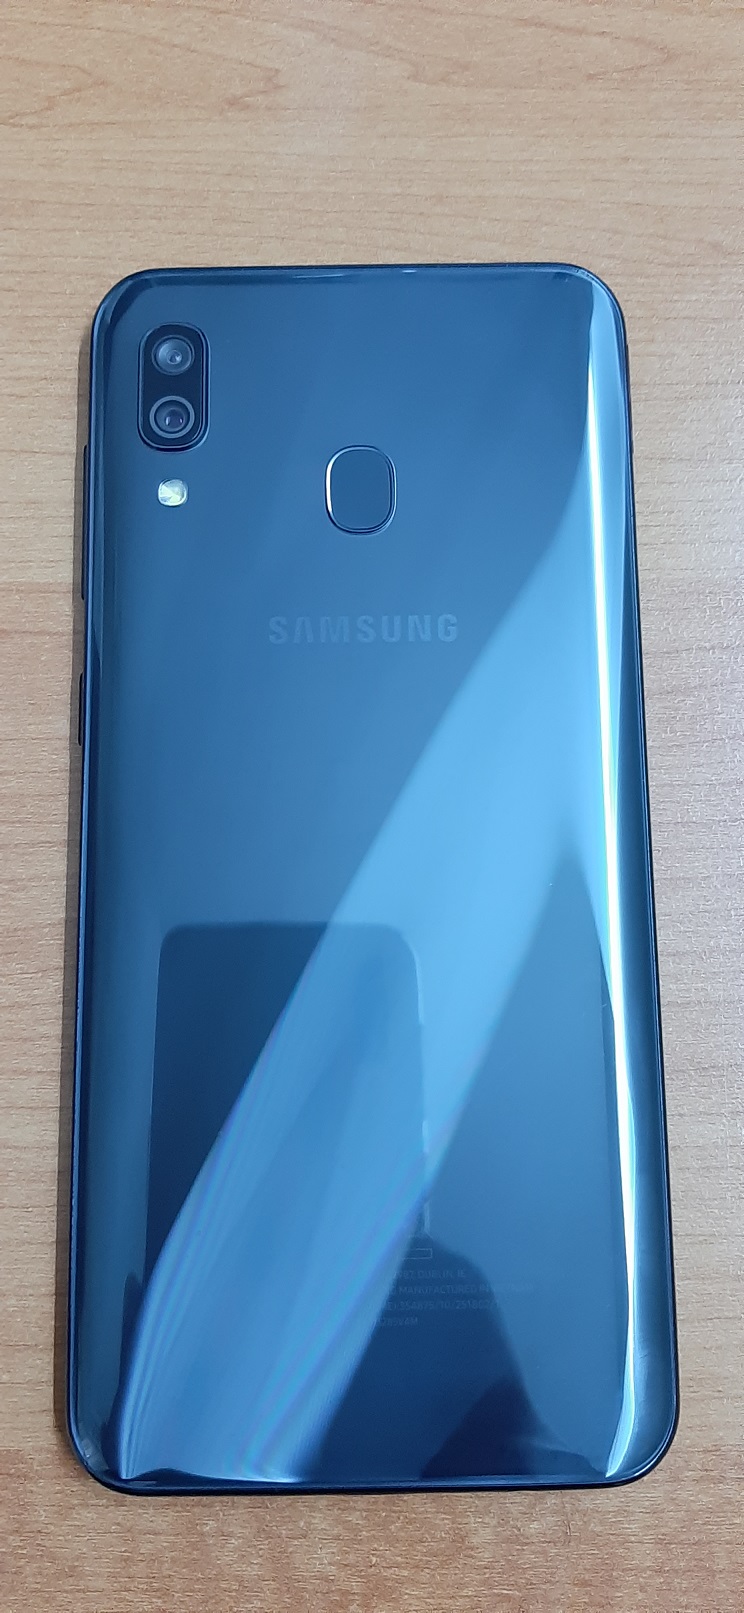 Samsung Galaxy A30 Review Great Display Sleek Design Offers Good Value